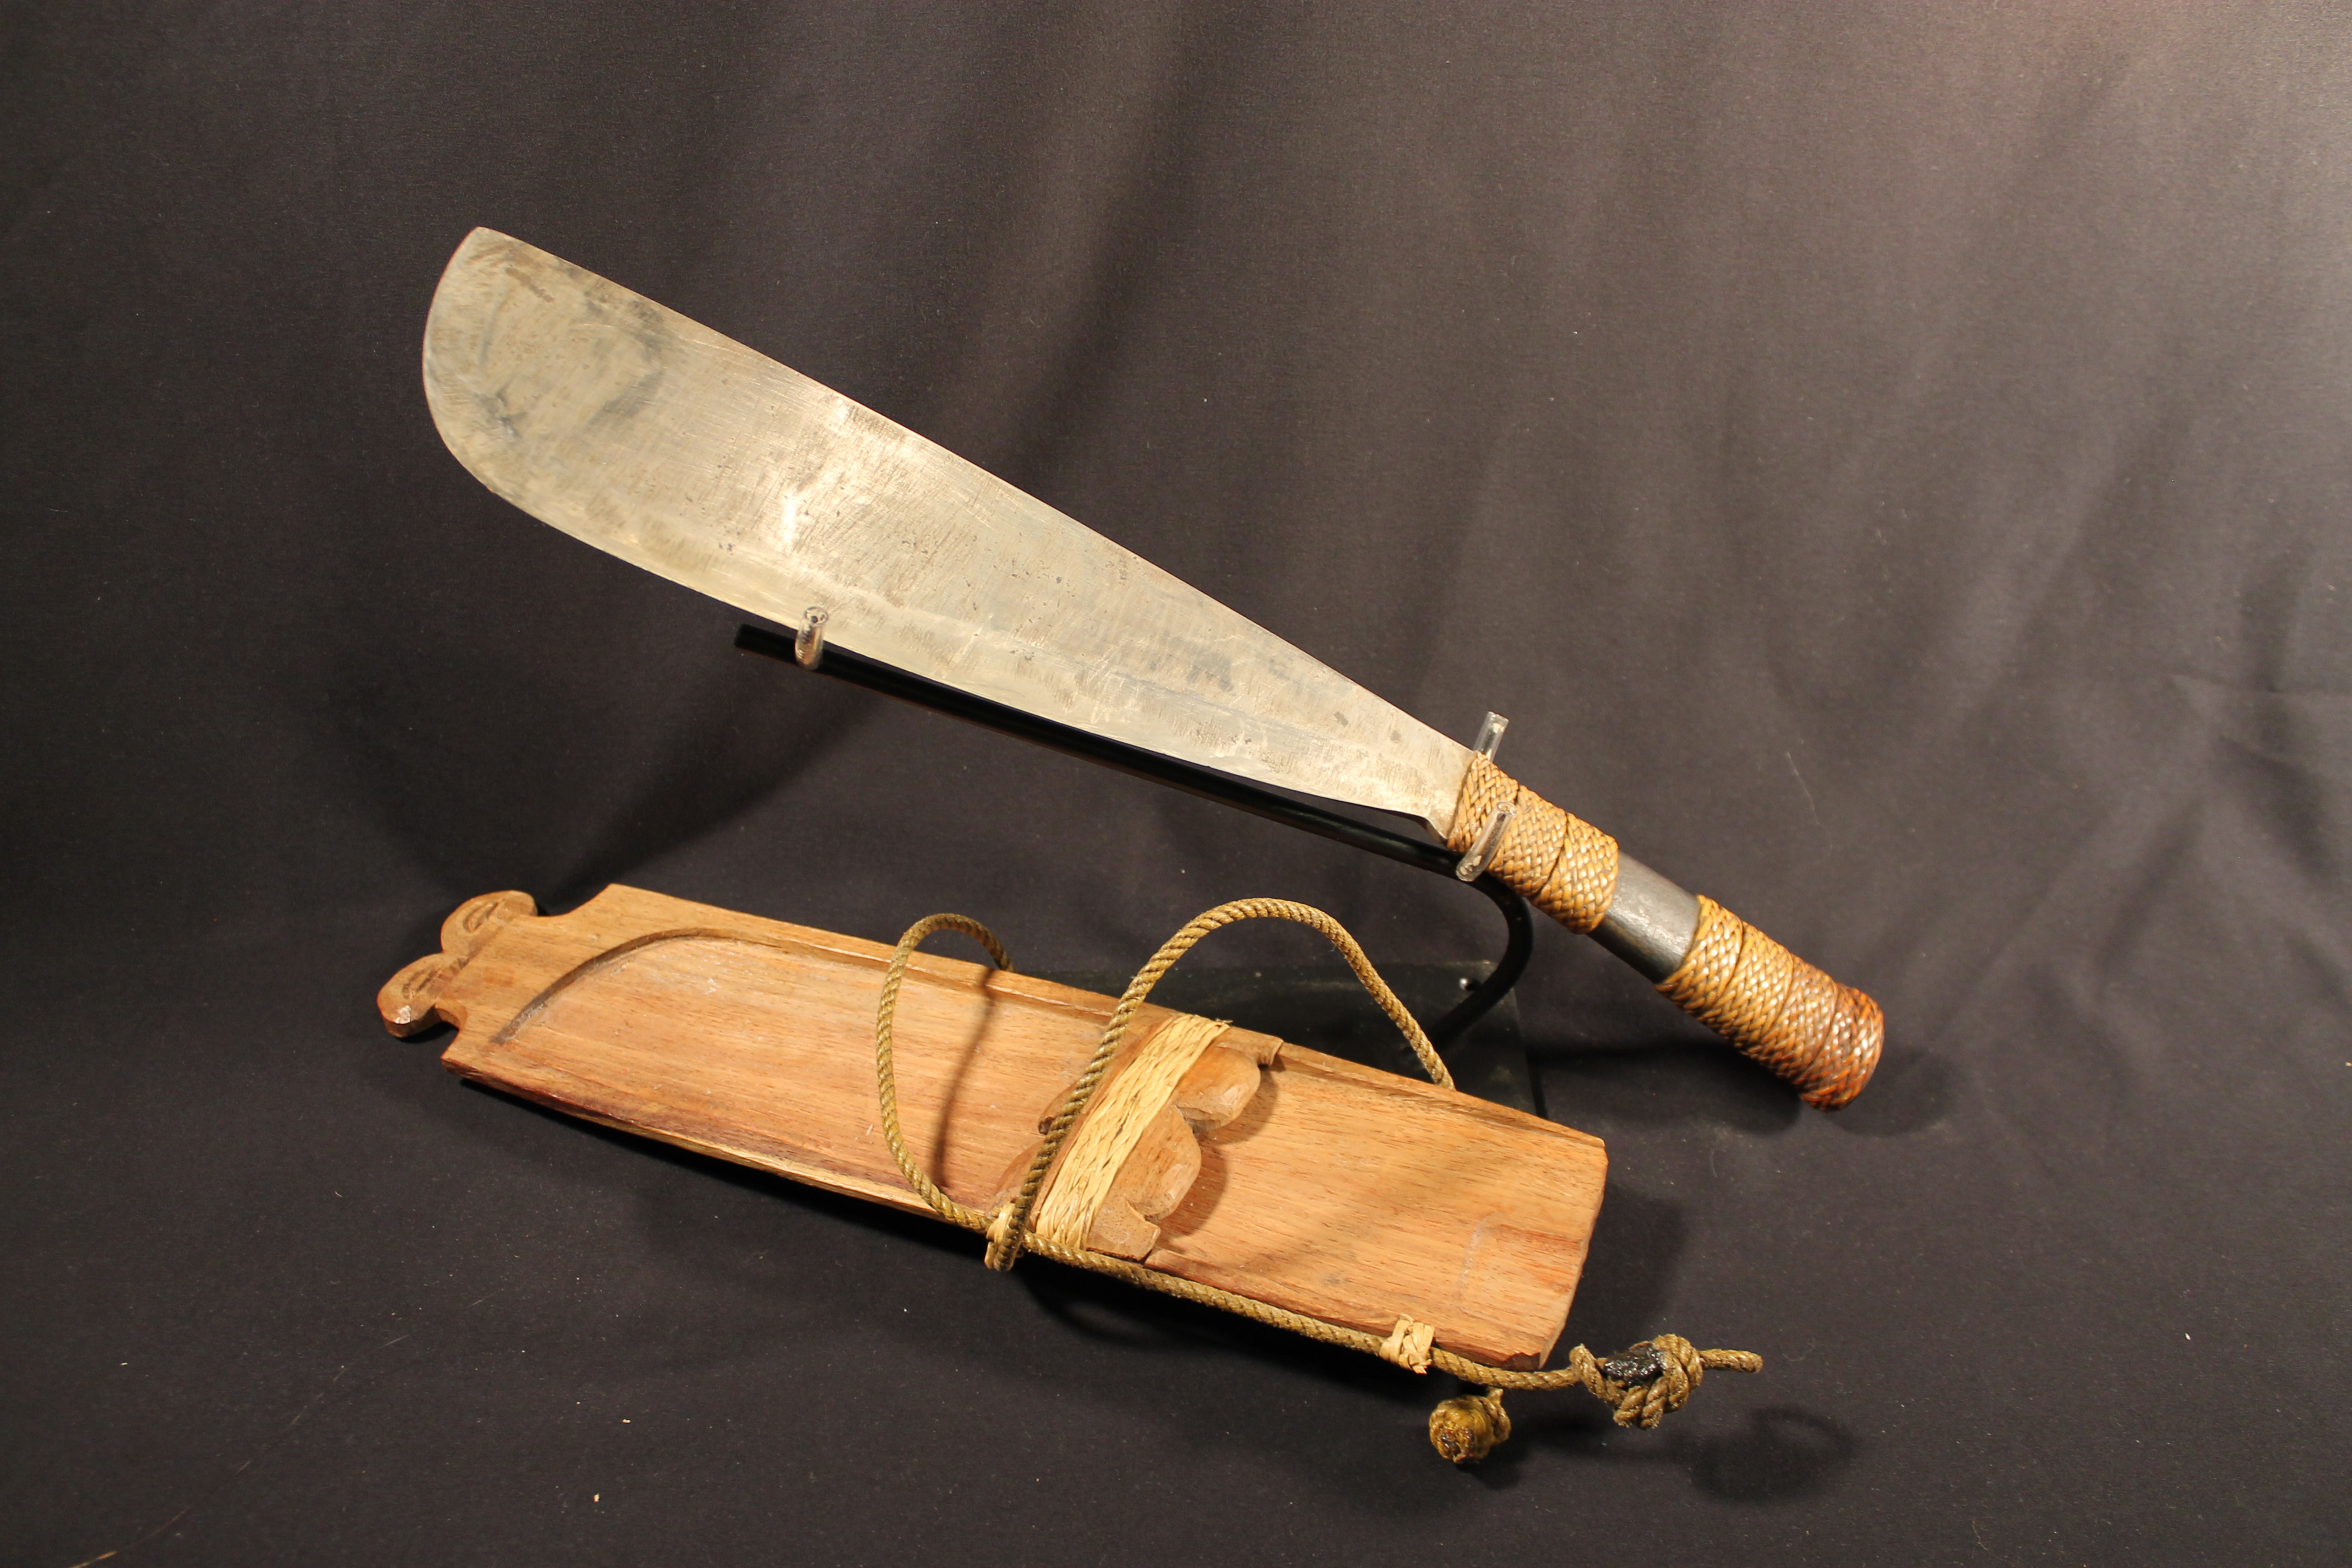 Knife with a wide blade and has several bands of braided plant fiber. Wooden knife sheath with carved decorations, band of braided plant fiber and an attached fiber rope 